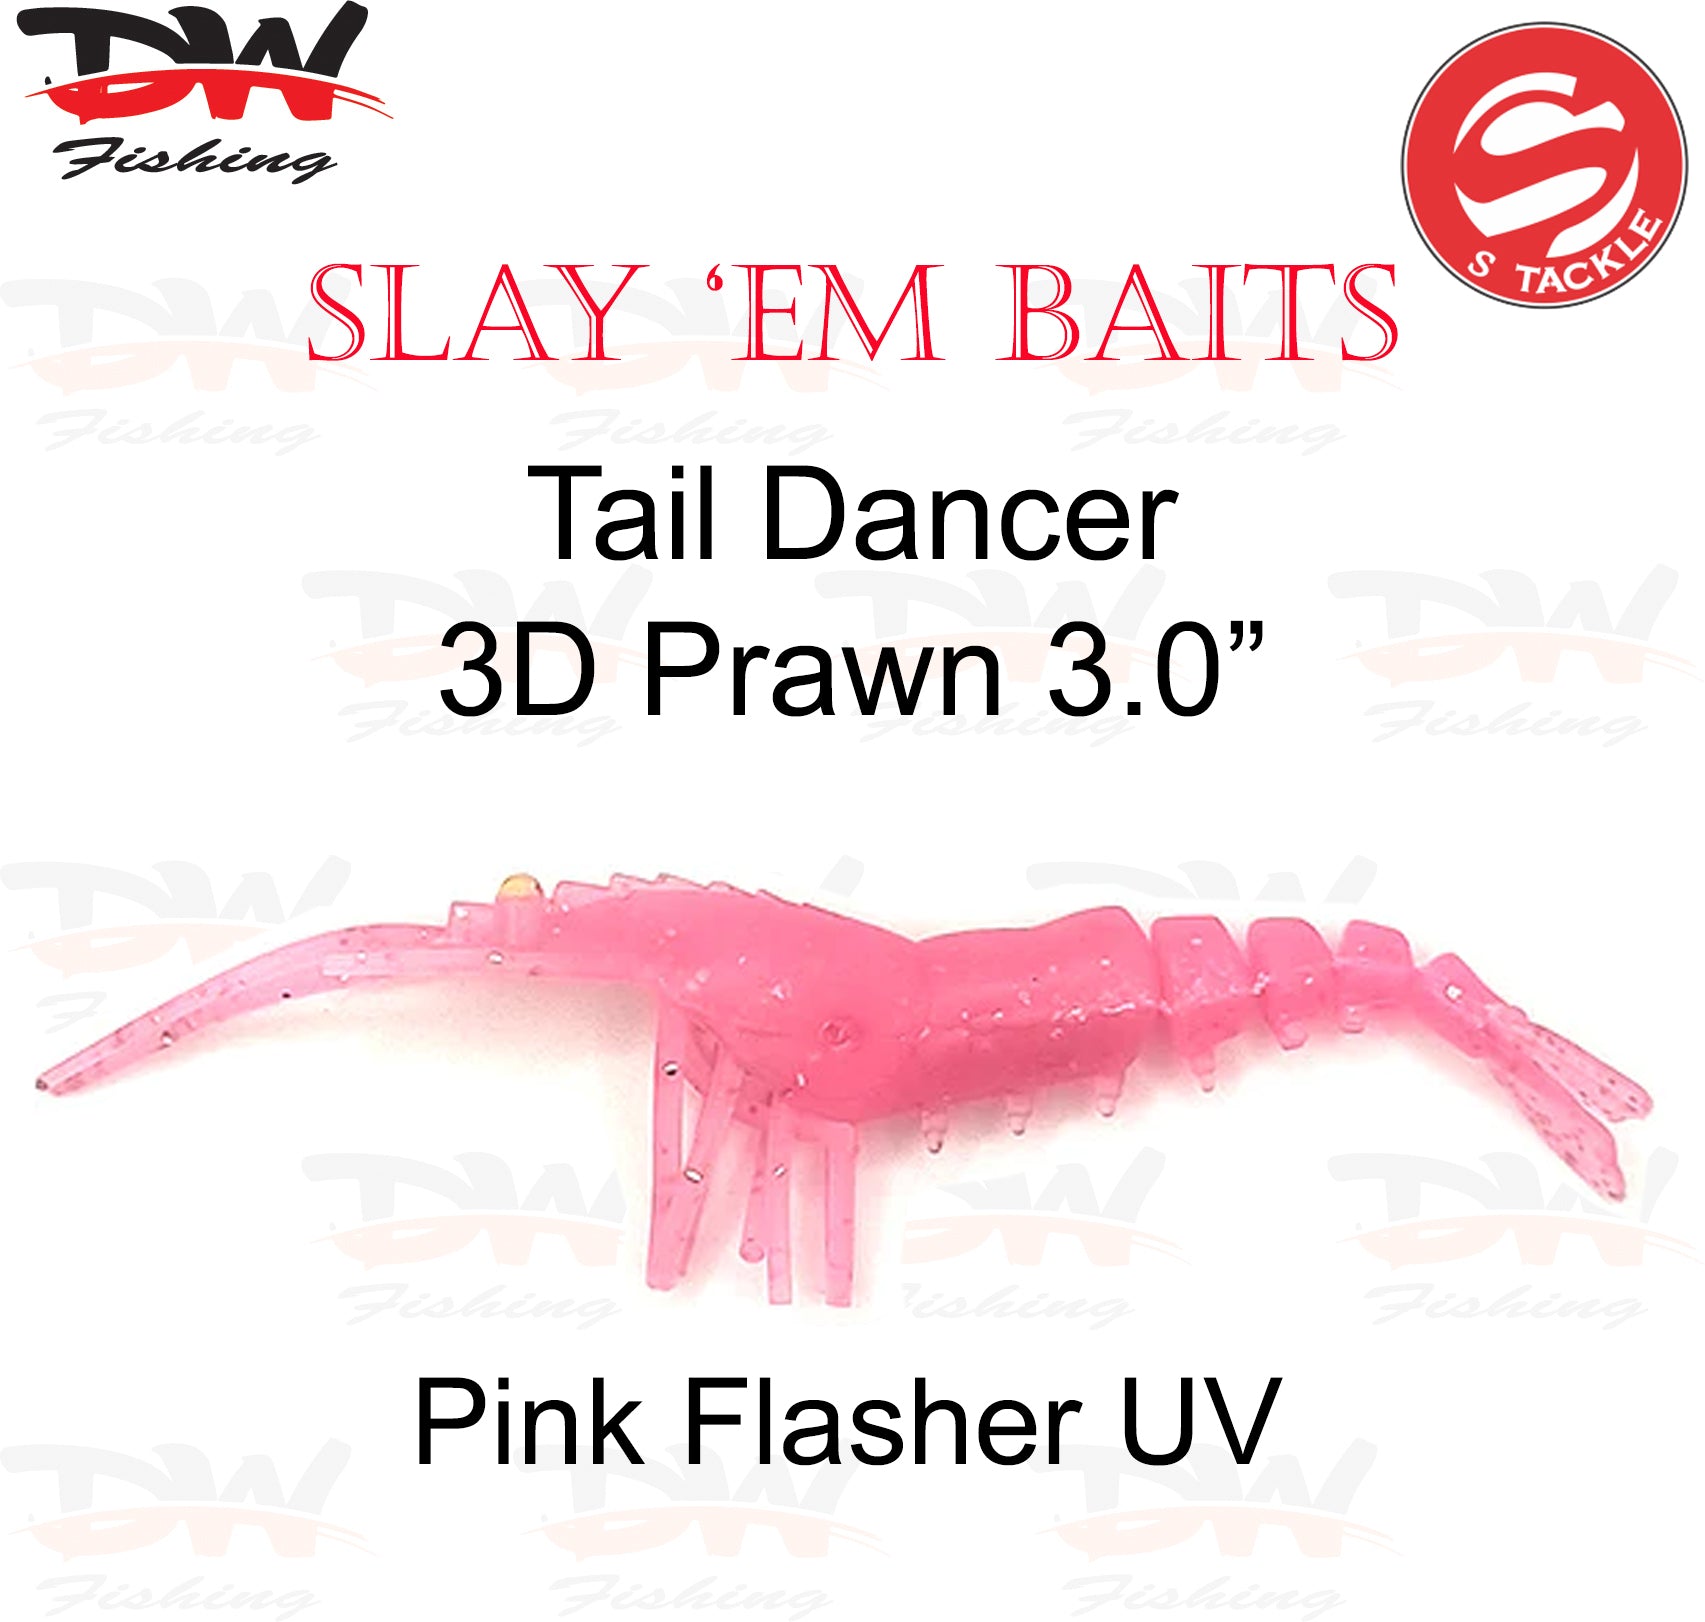 S Tackle Soft Plastic Lure, Fishing Lure Online